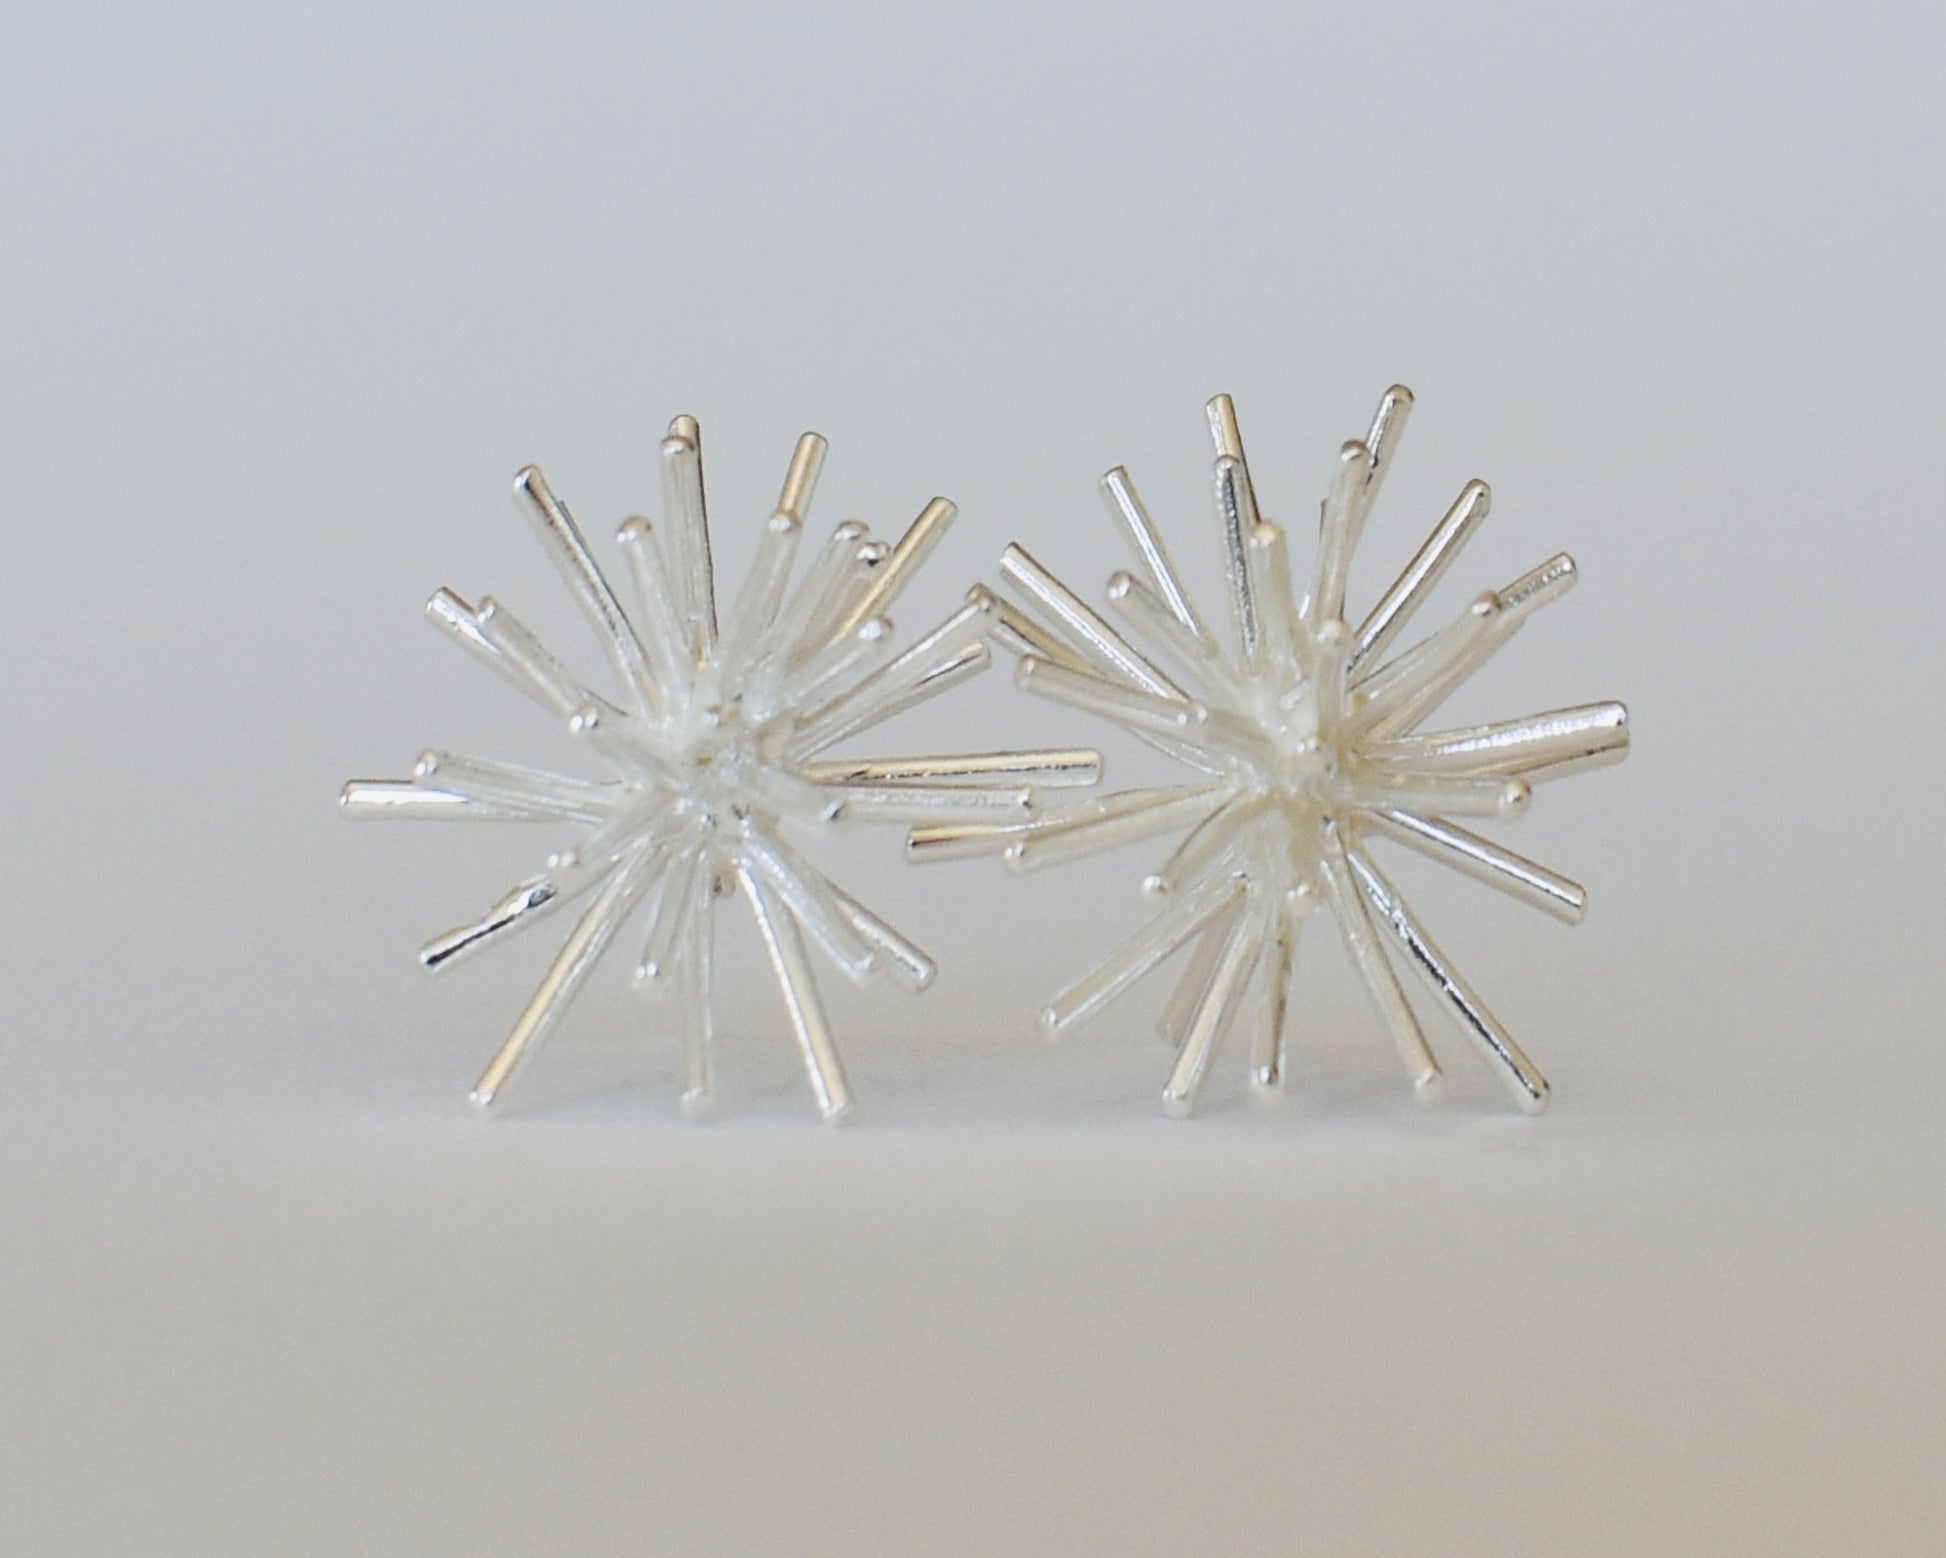 Sea Urchin earrings in solid recycled sterling silver. 